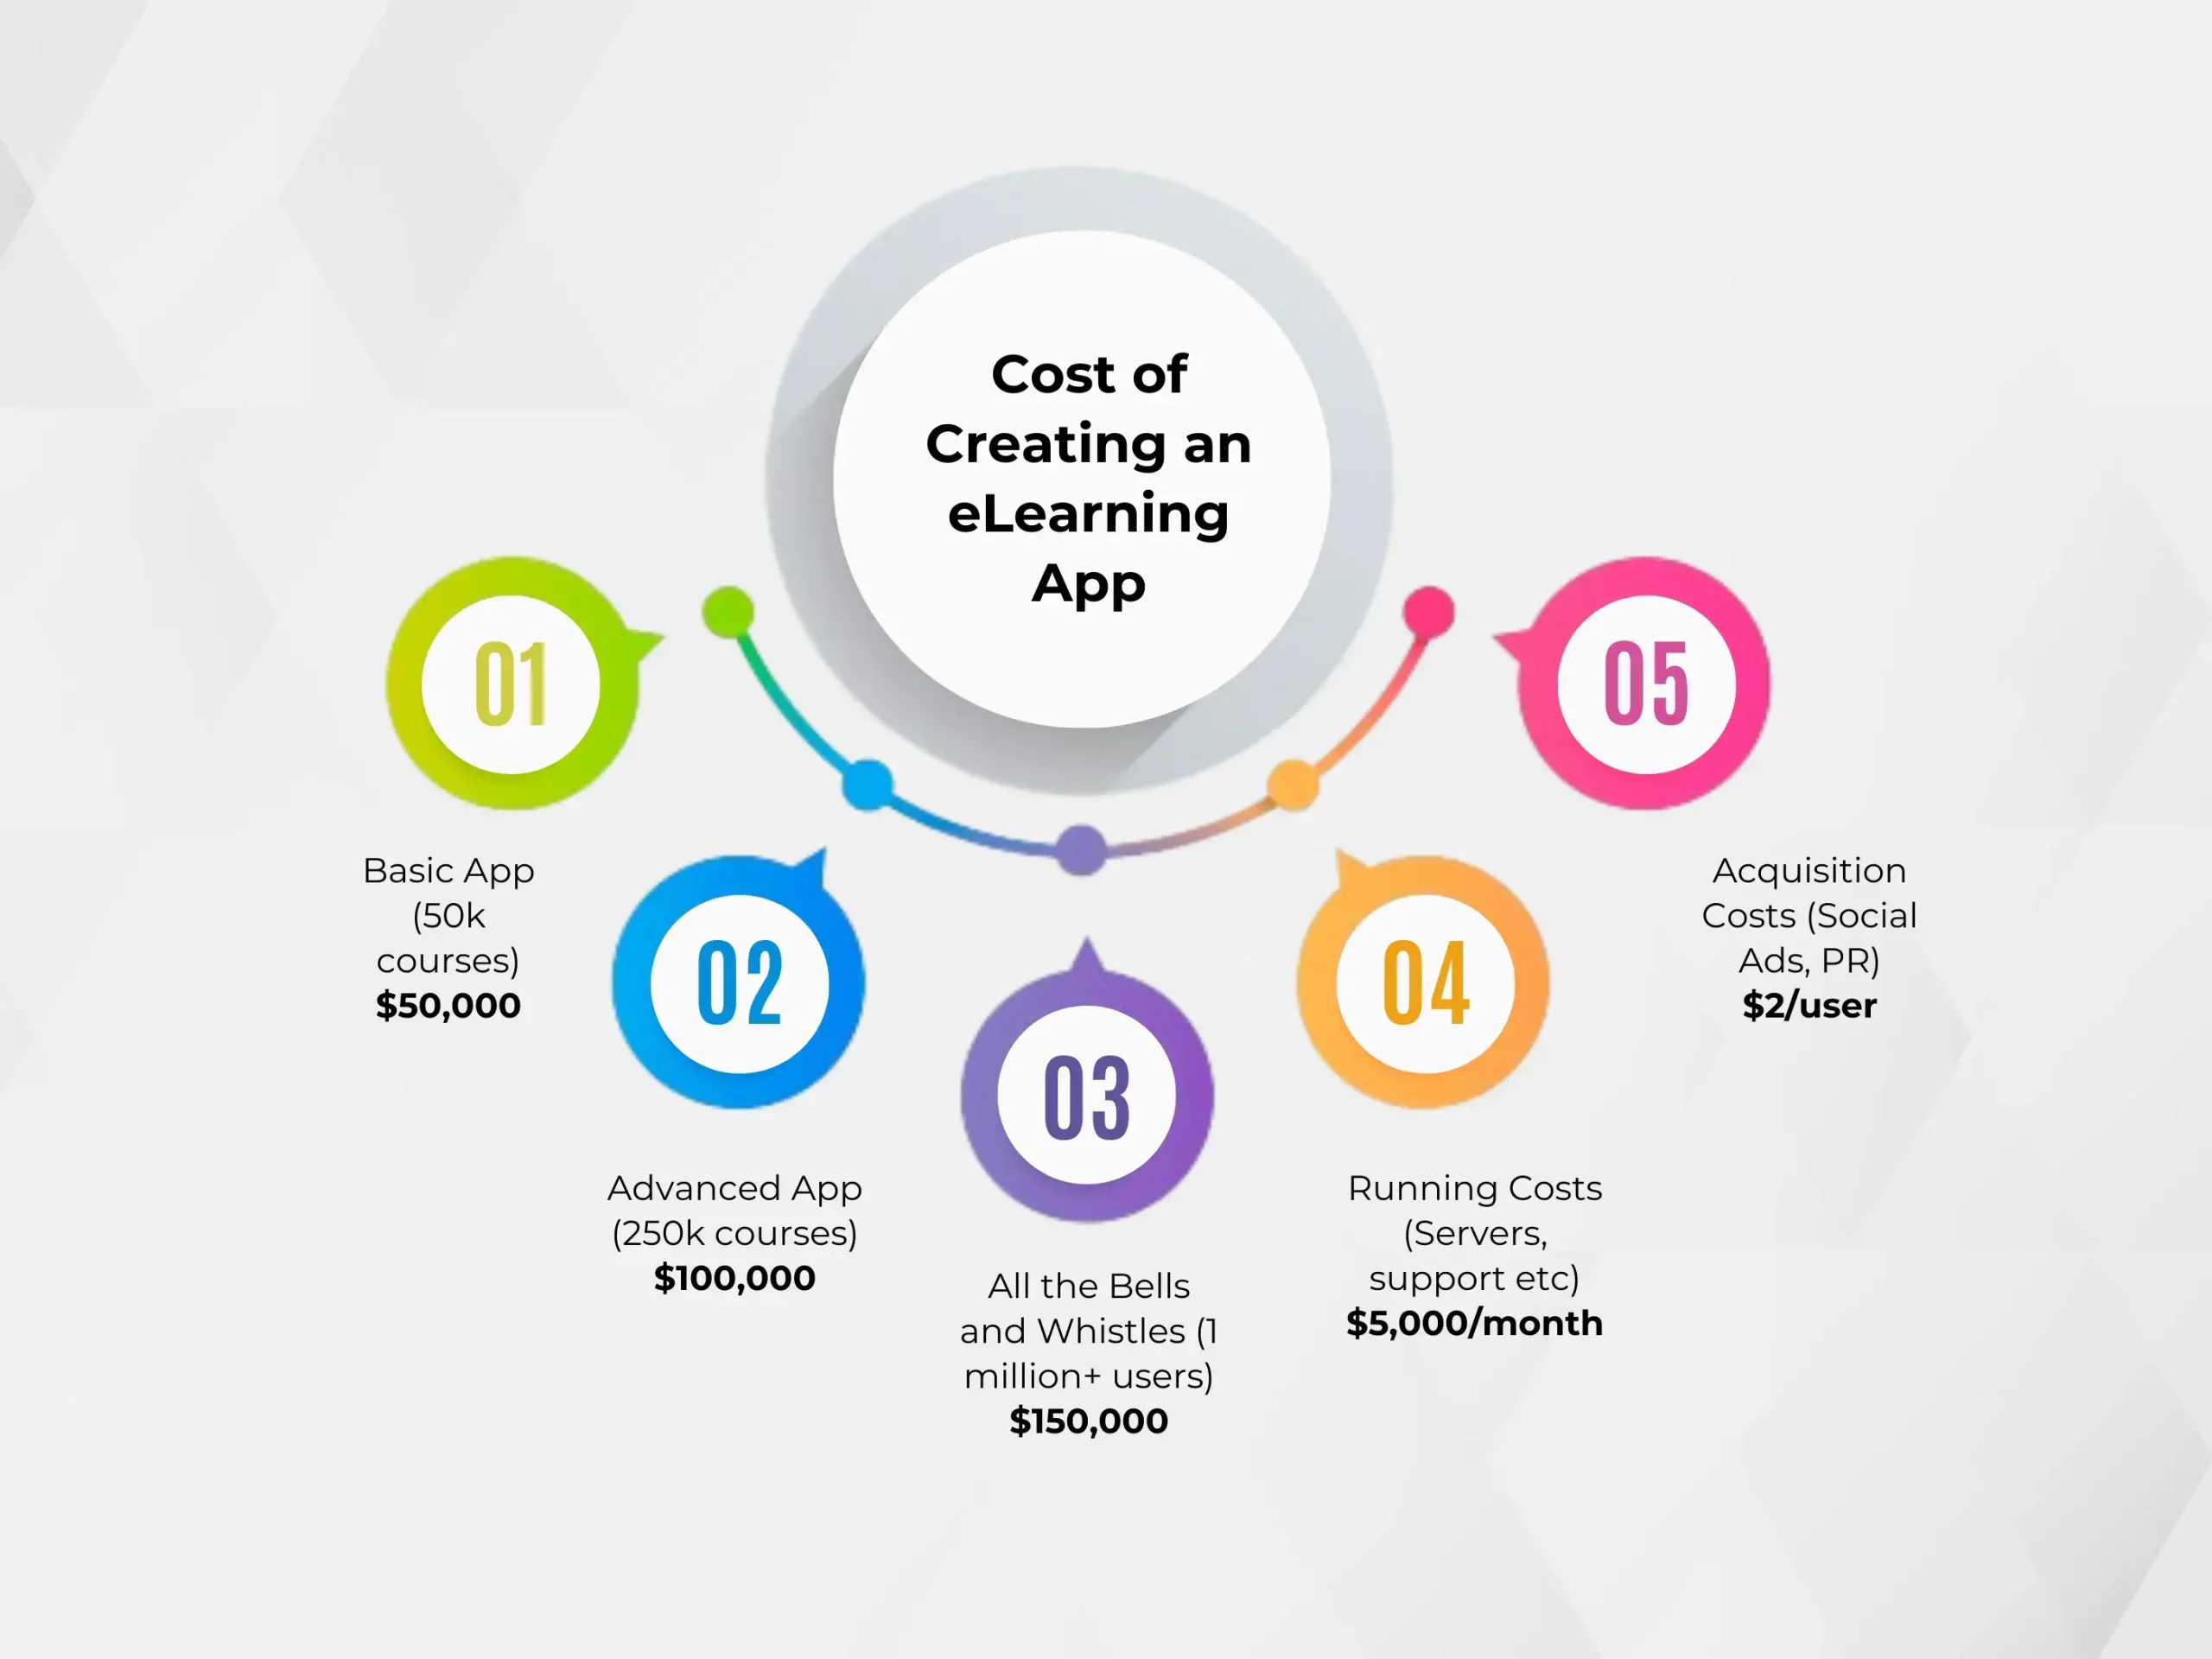 Cost of Creating an eLearning App